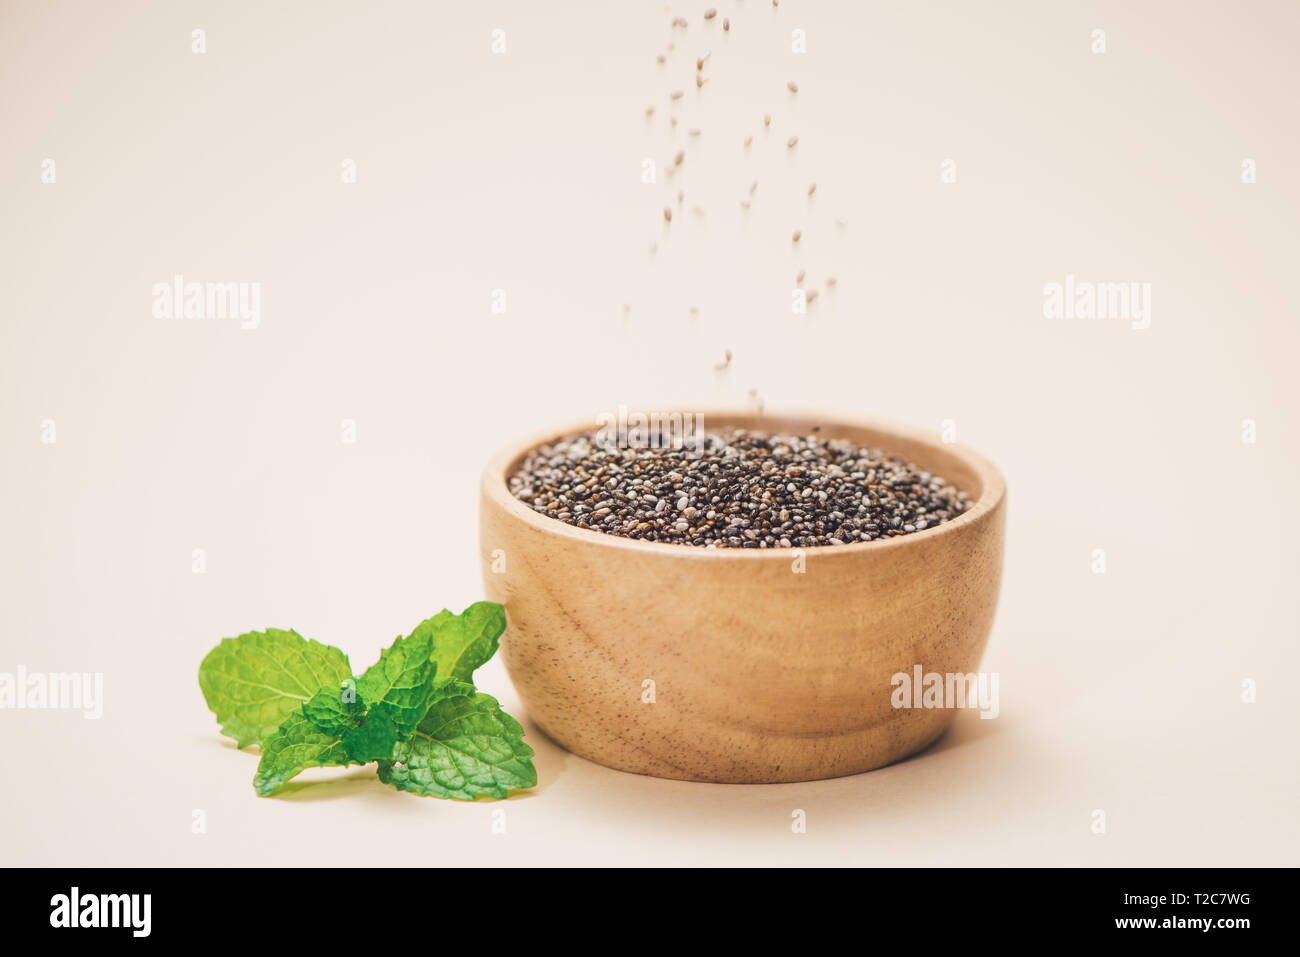 Close-up of raw, unprocessed, dried black chia seeds Stock Photo